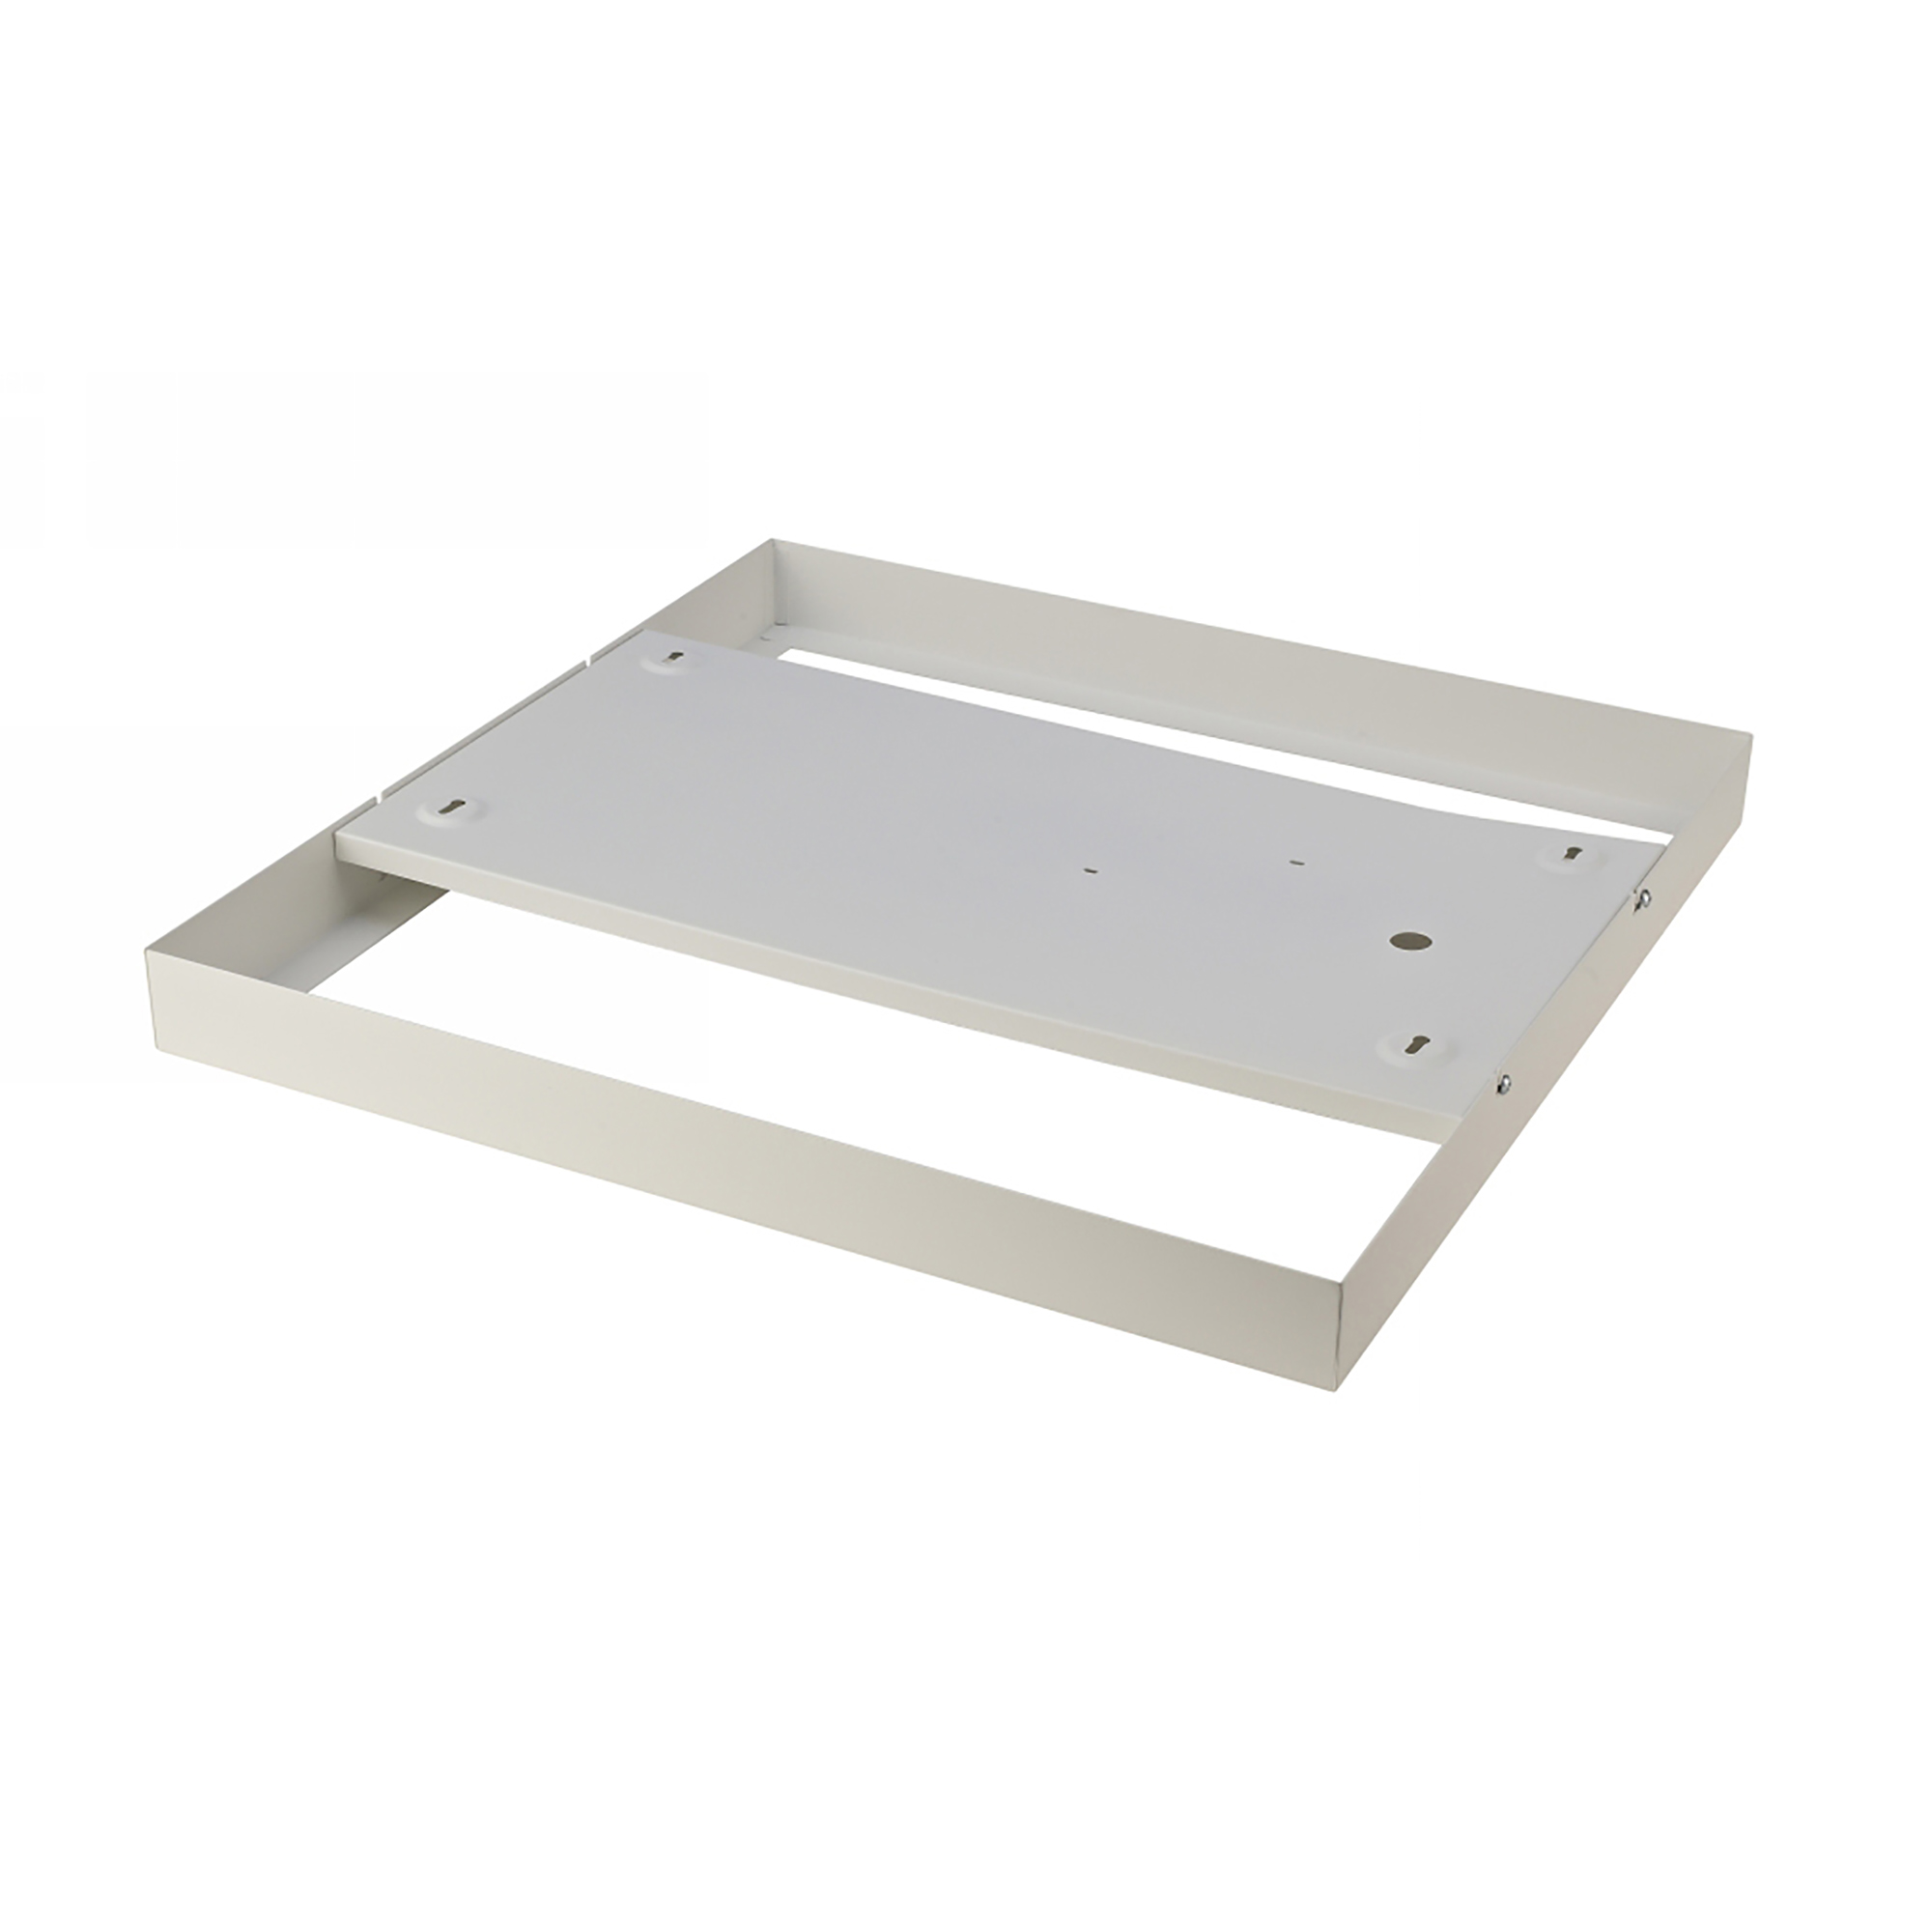 DA240005/TW  Piano 66 Surface Mounting Frame In Textured White For Panel 595x595mm, 5yrs Warranty